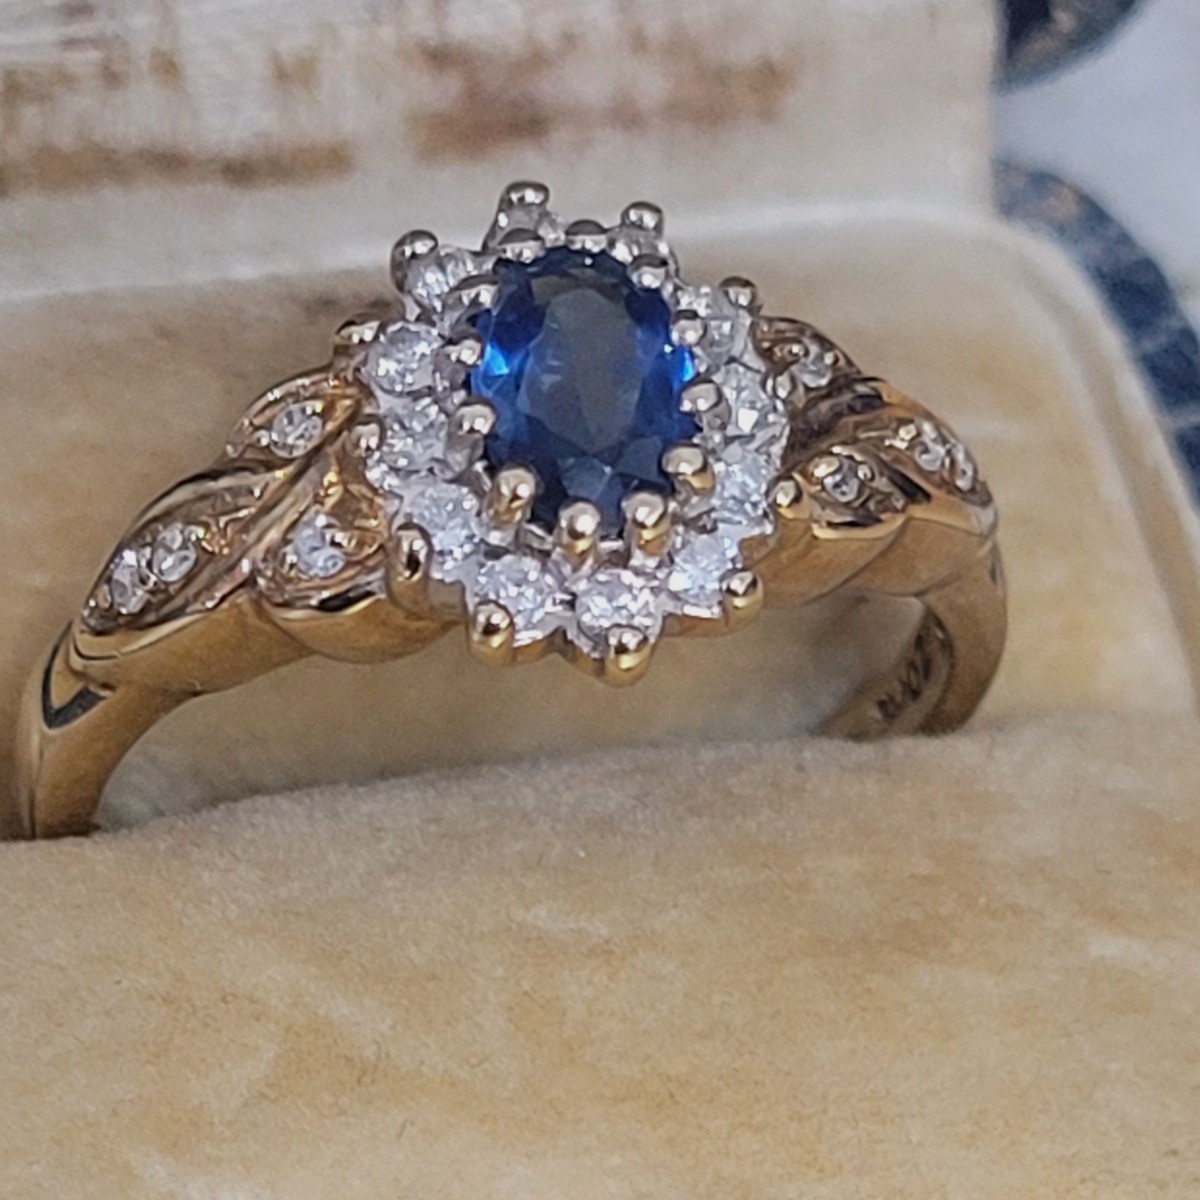 What Does a Sapphire Engagement Ring Symbolize?